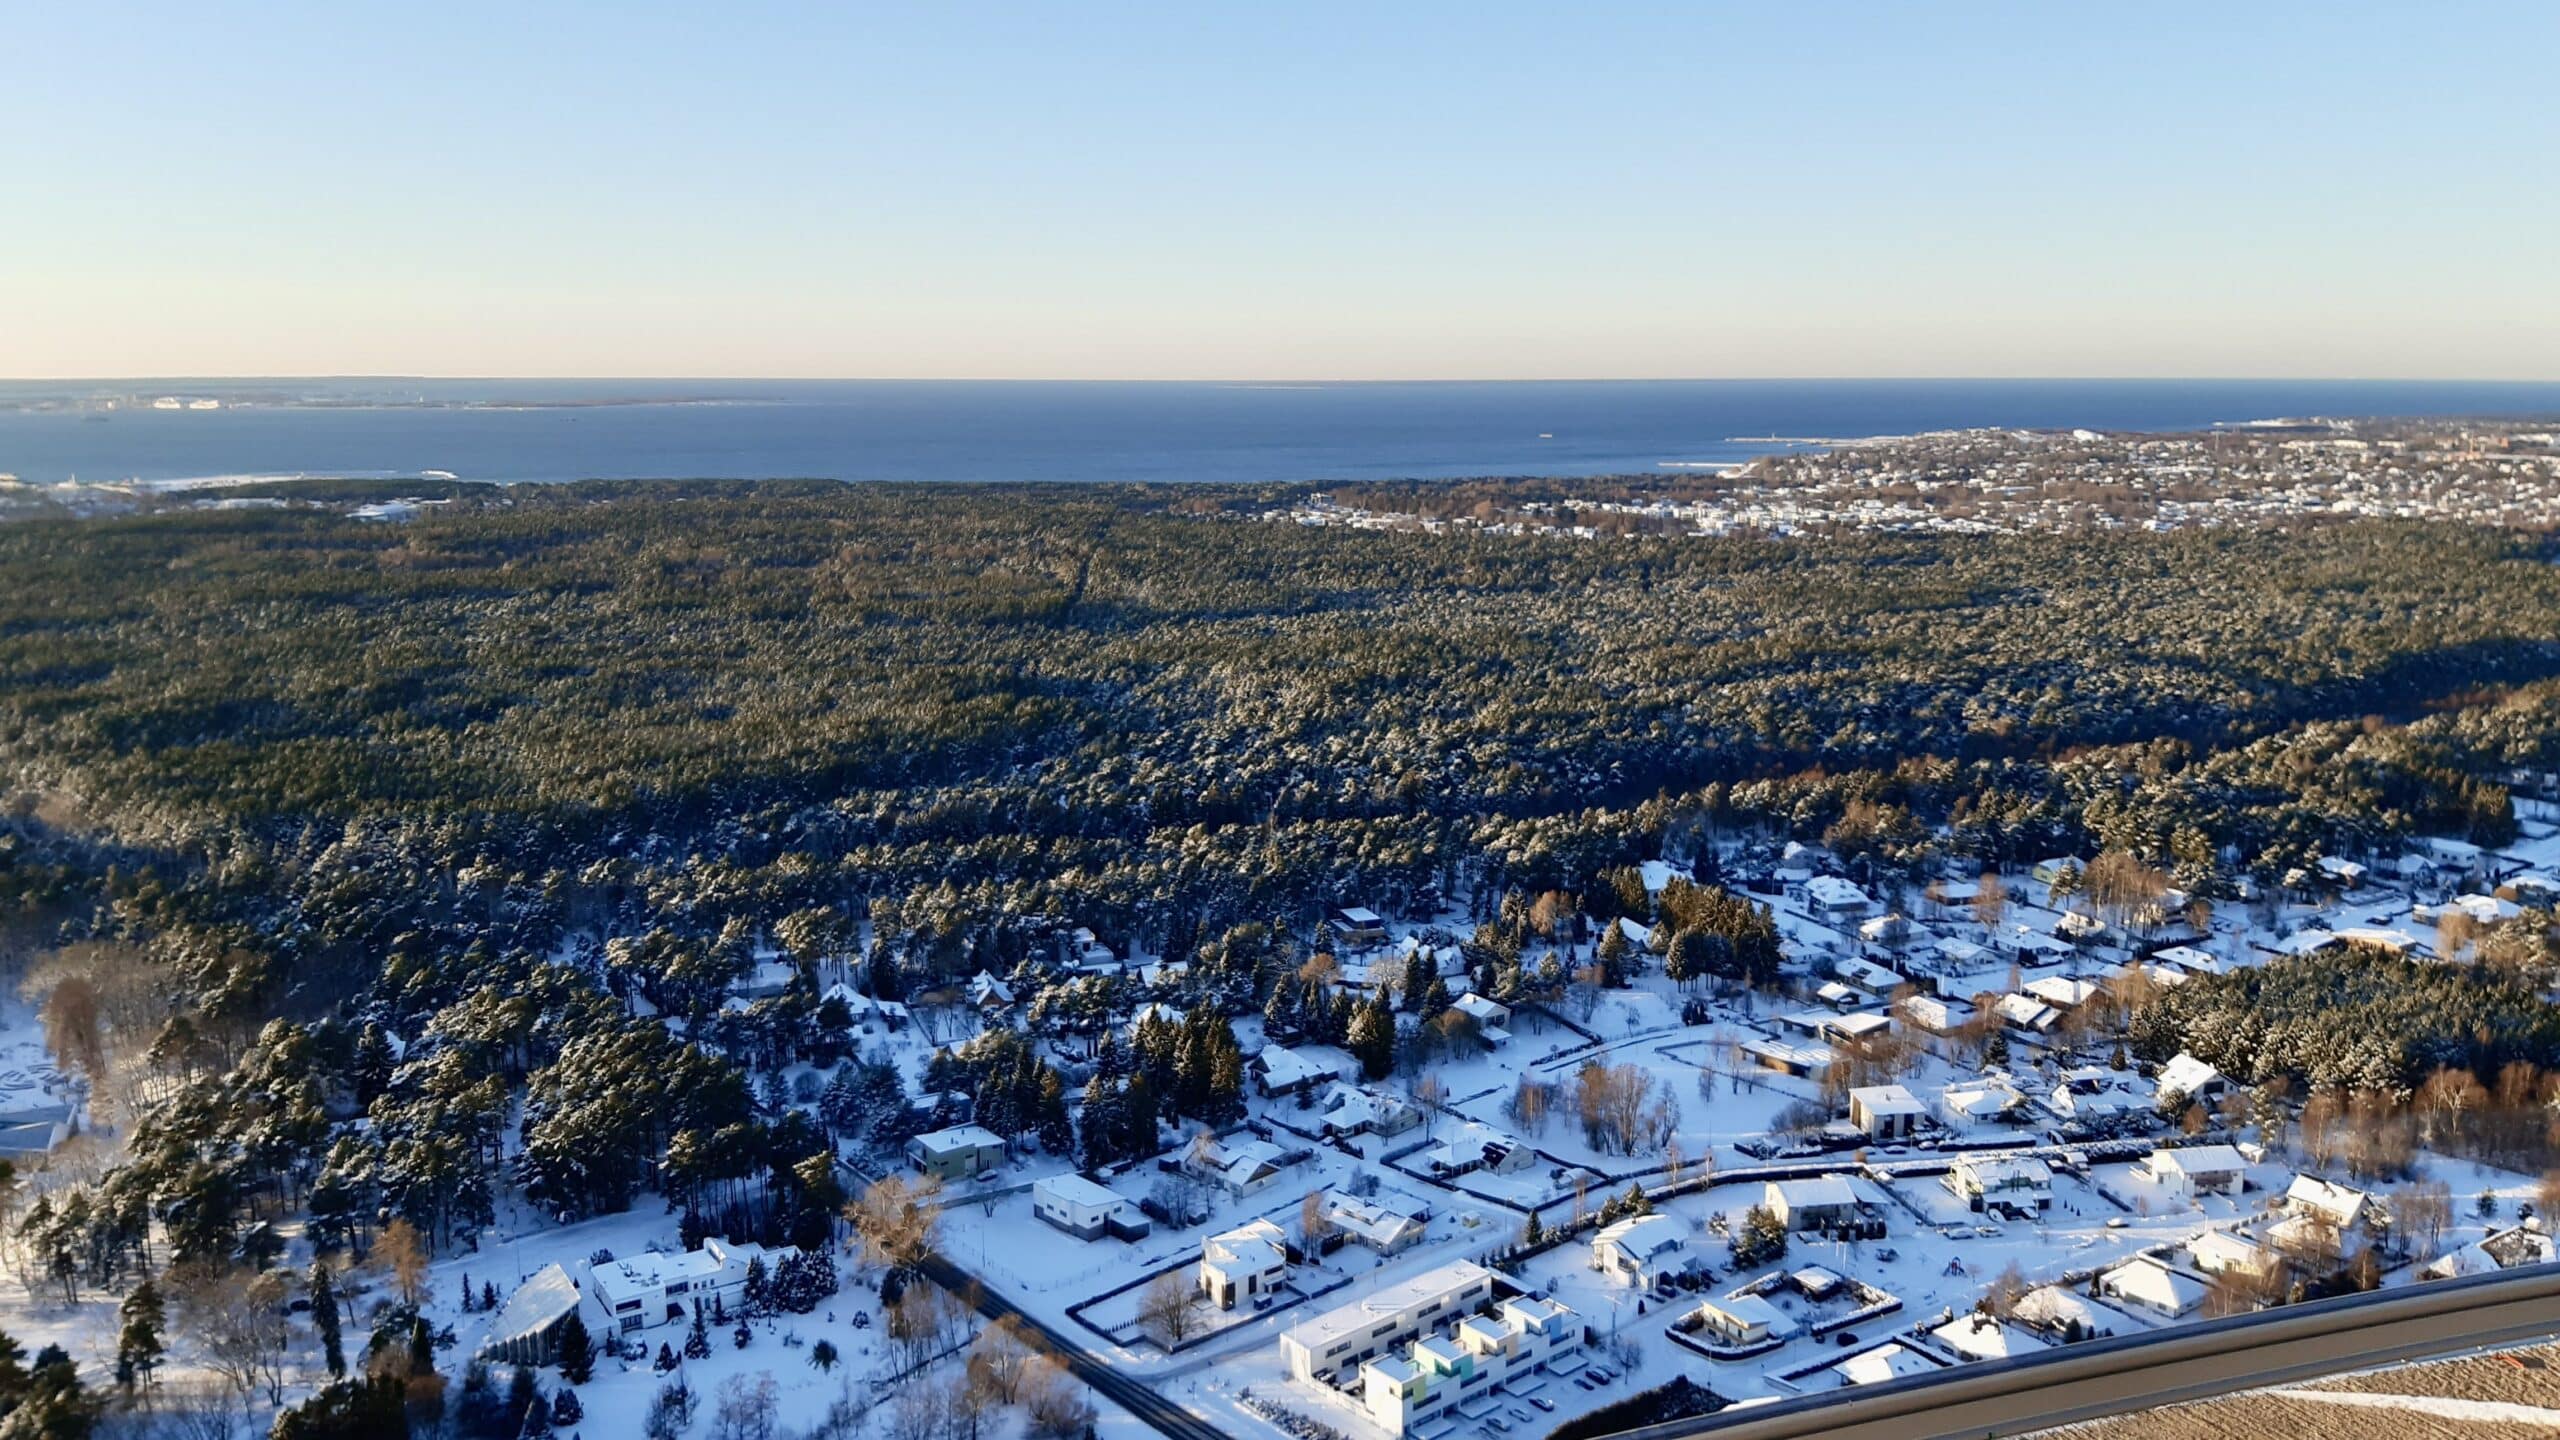 The photo depicts a sunny, clear-skied birds-eye view of the landscape with snowy residential buildings at the bottom of the image and, further in the distance, spruce forest and blue-colored water of Tallinn Bay